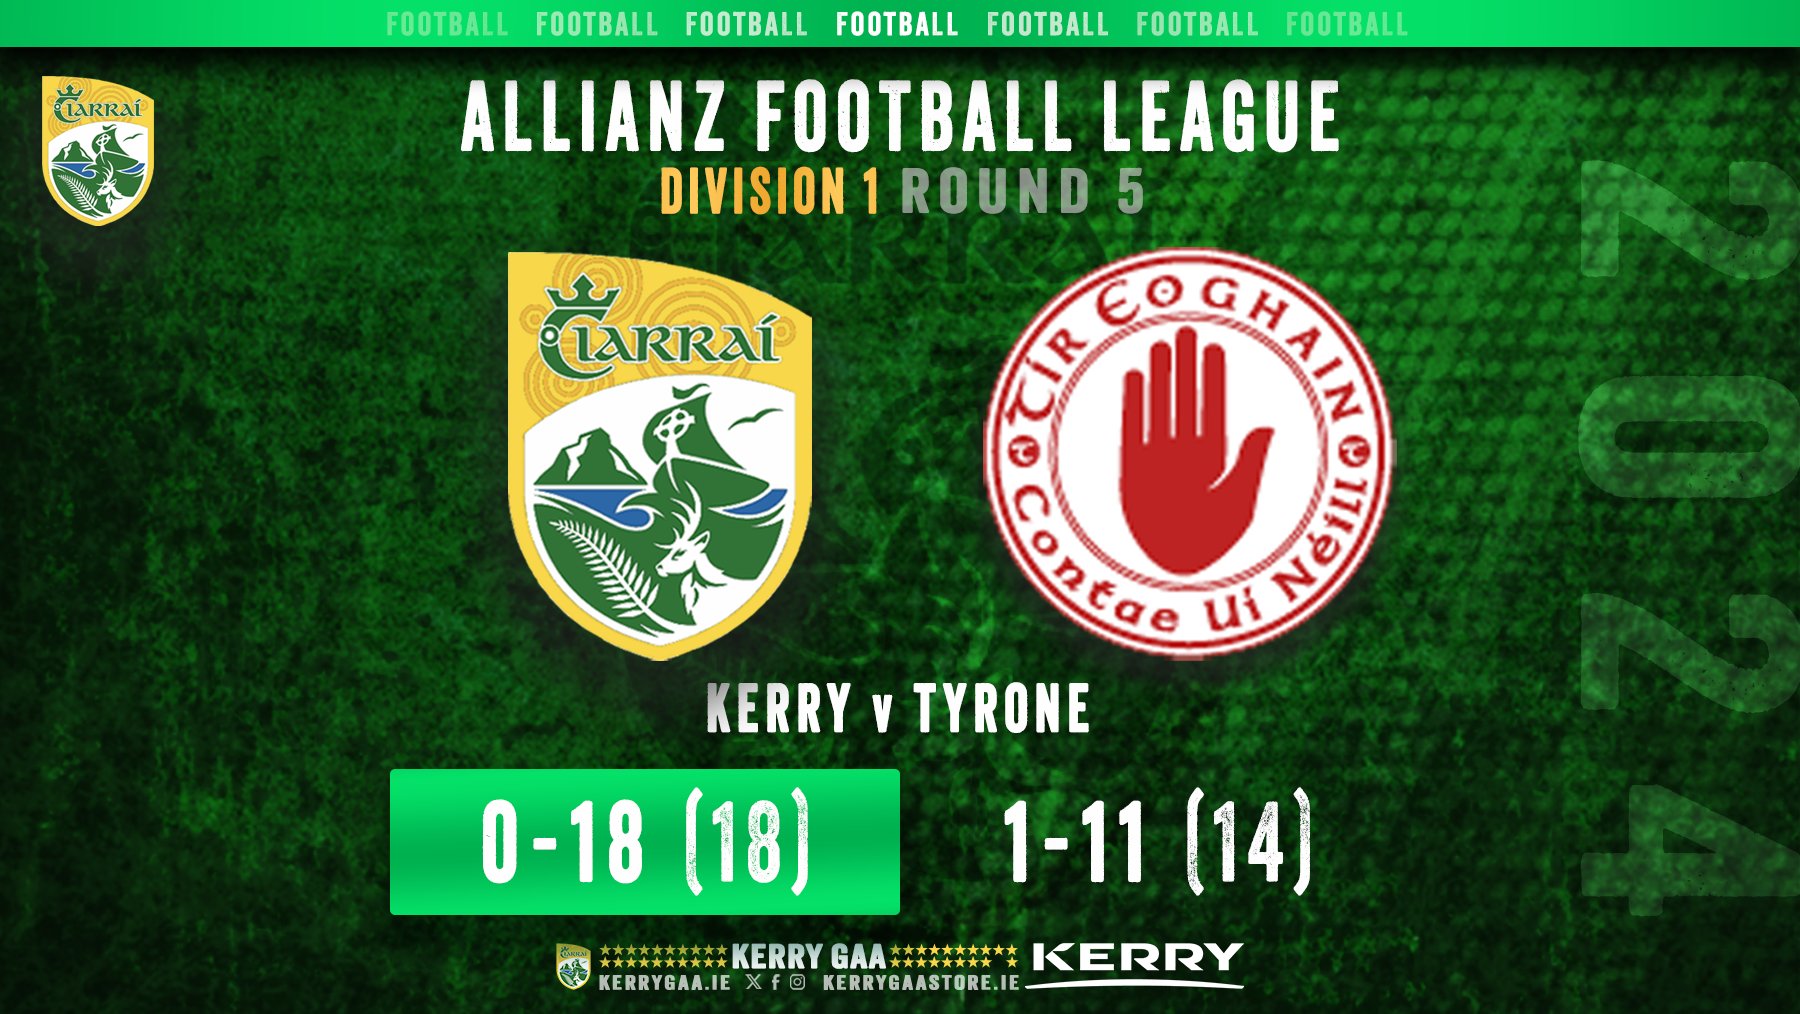 A win for Kerry Footballers over Tyrone